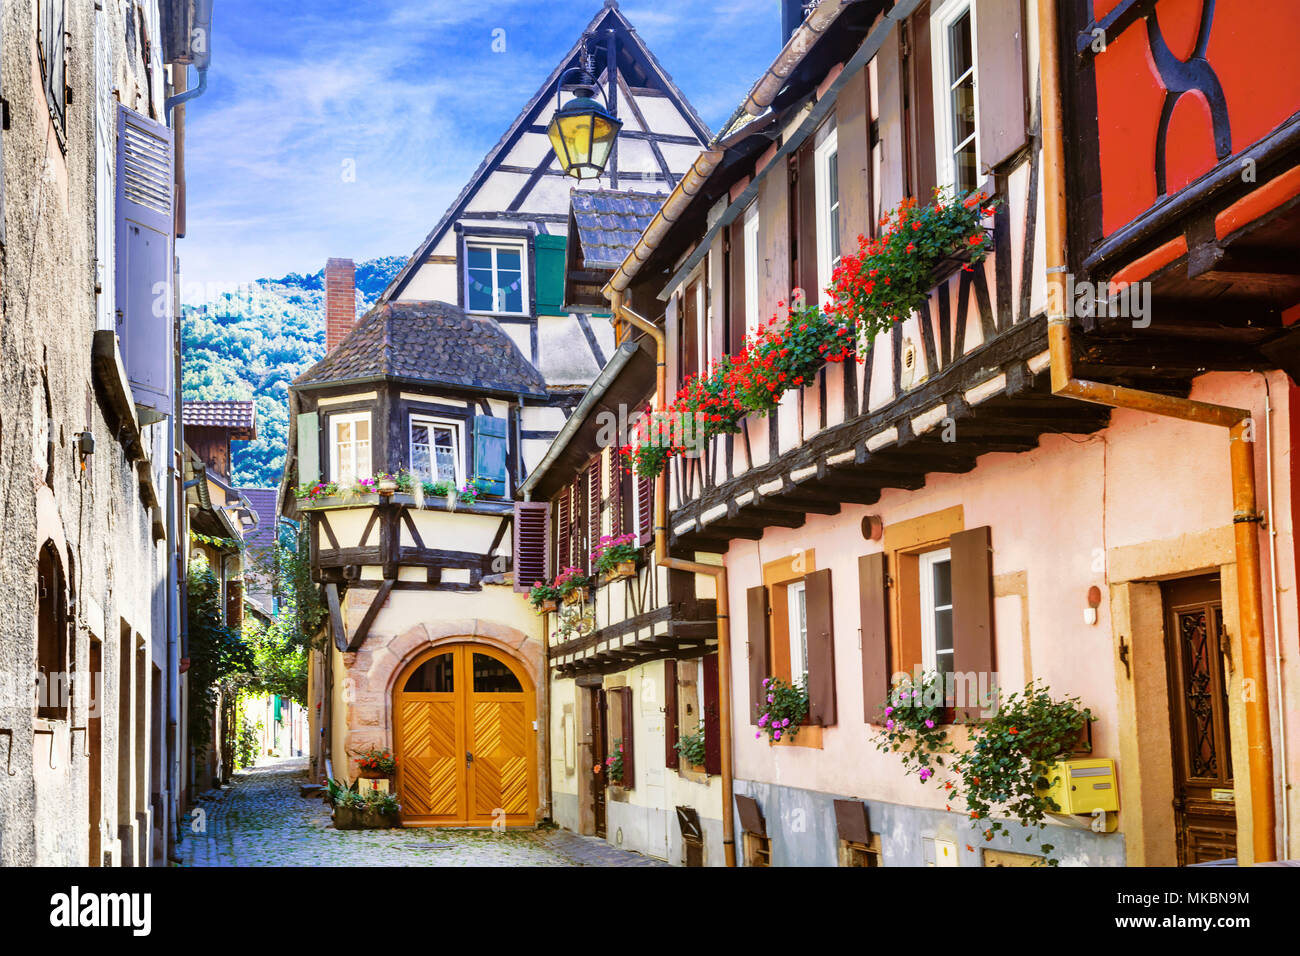 Colorful traditional houses in Kayseberg village,Alsace,France. Stock Photo